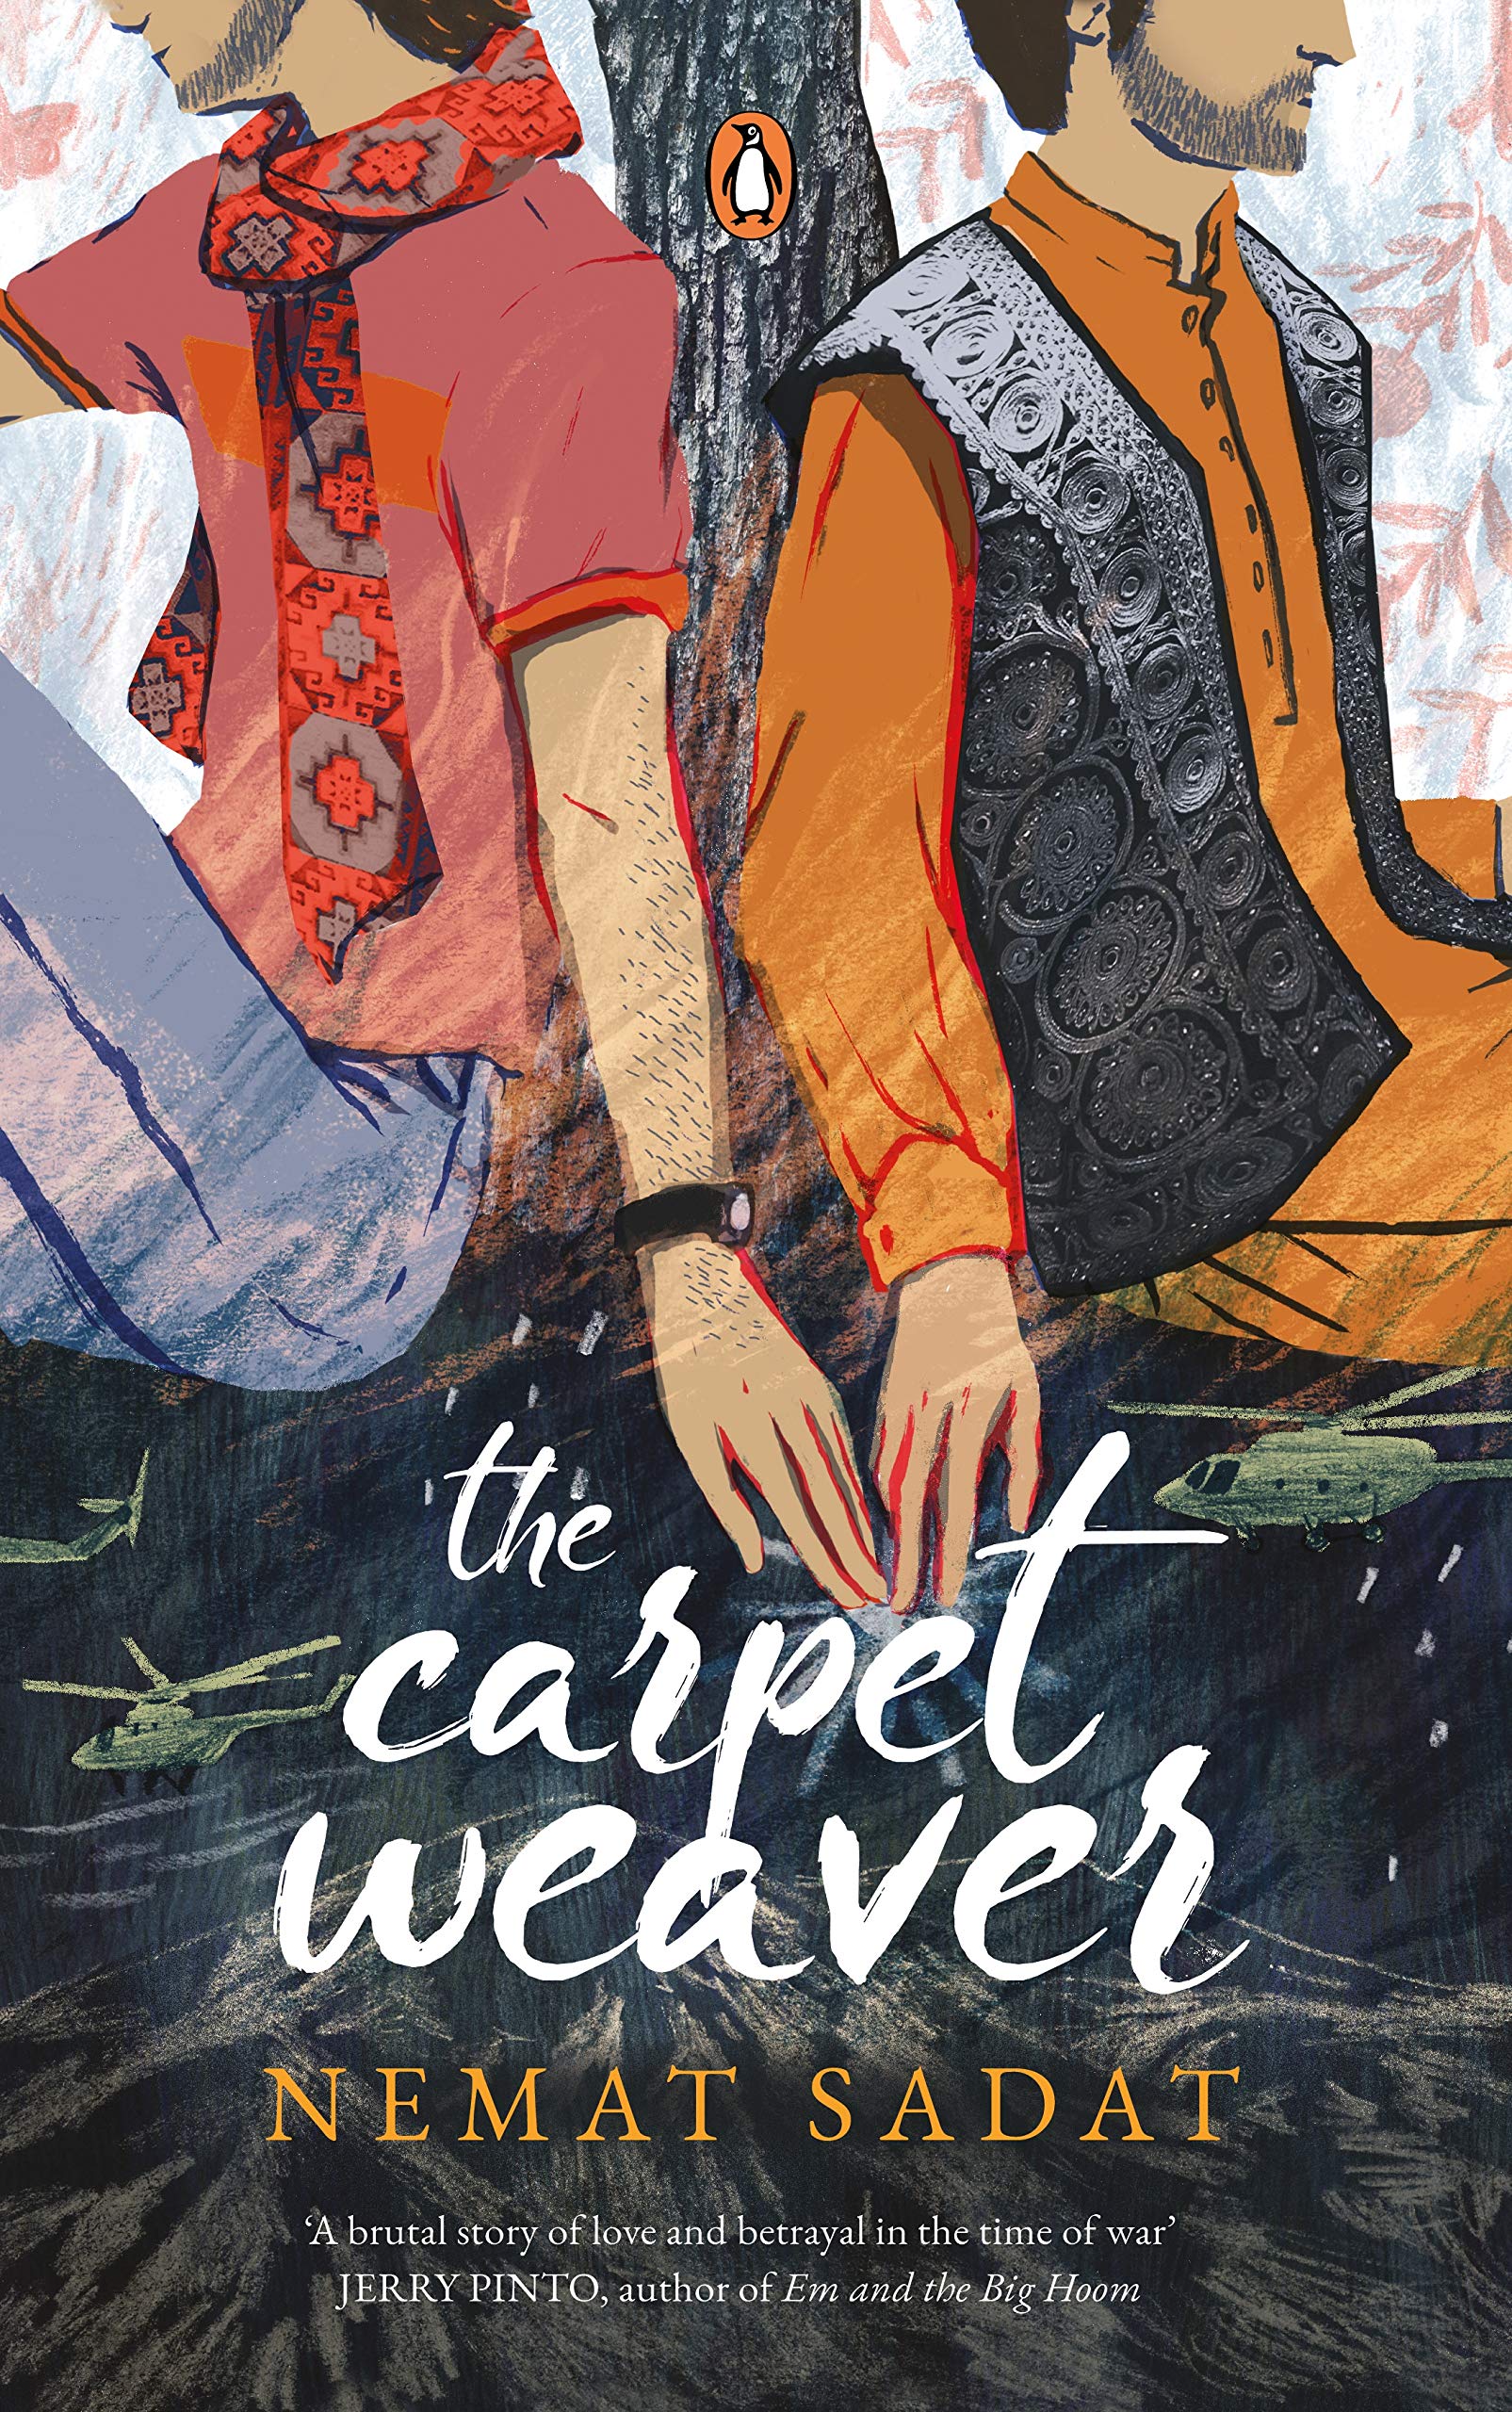 Here’s Why Nemat Sadat’s The Carpet Weaver Is a Must–Buy